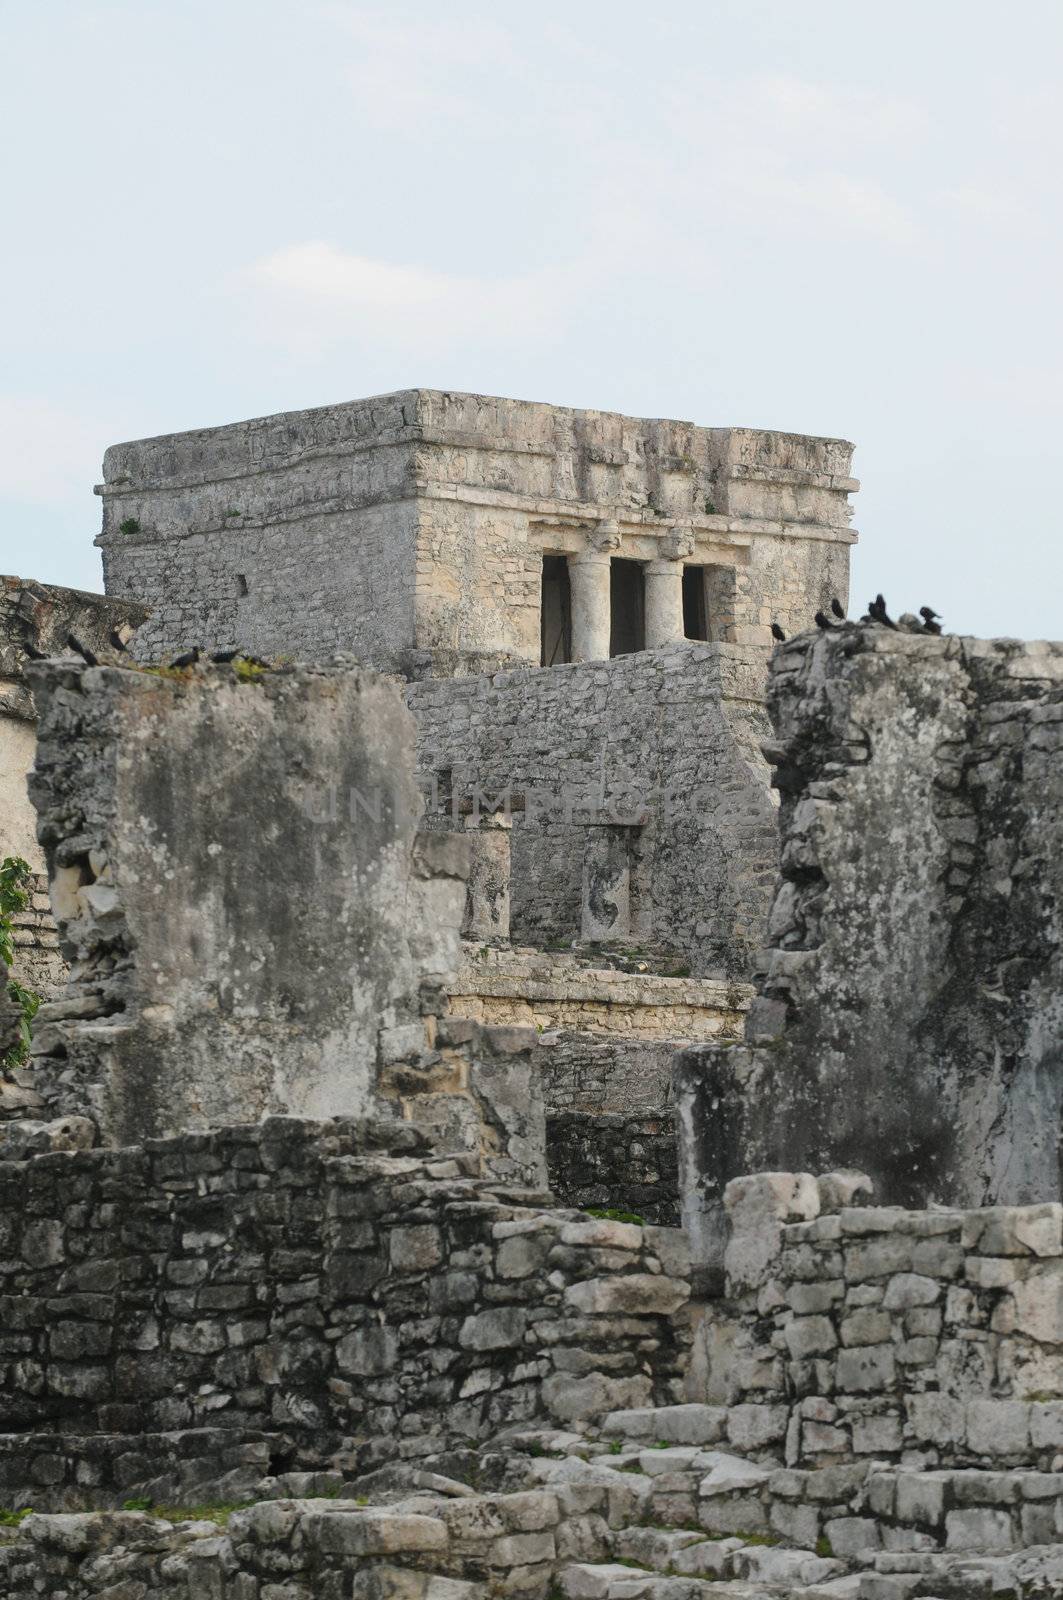 Mayan Tulum Ruins in Mexico